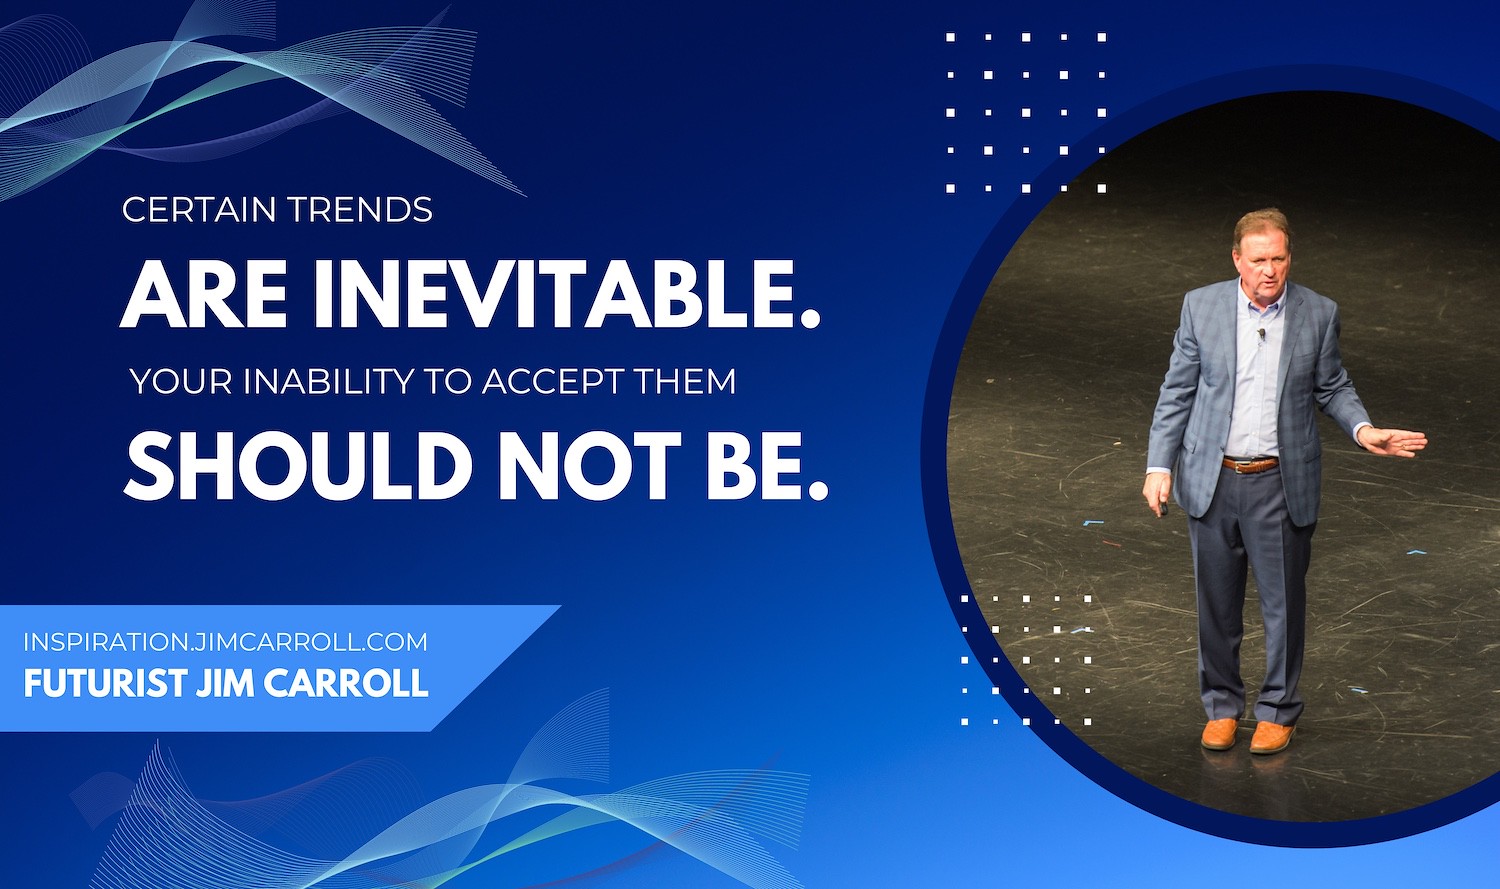 "Certain trends are inevitable.  Your inability to accept them should not be." - Futurist Jim Carroll